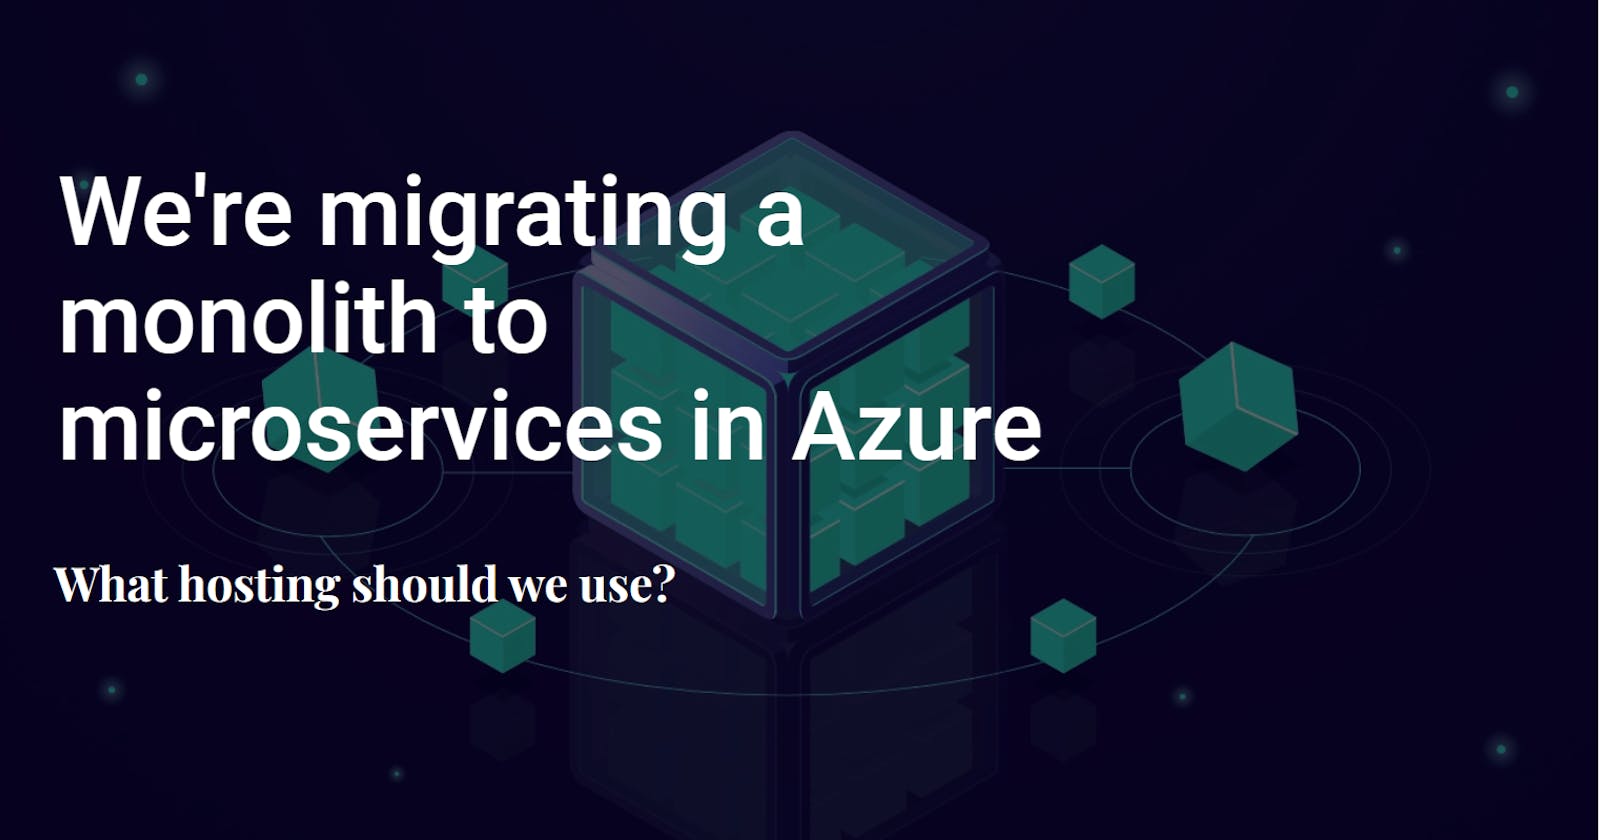 We're migrating a monolith to microservices in Azure - What hosting should we use?